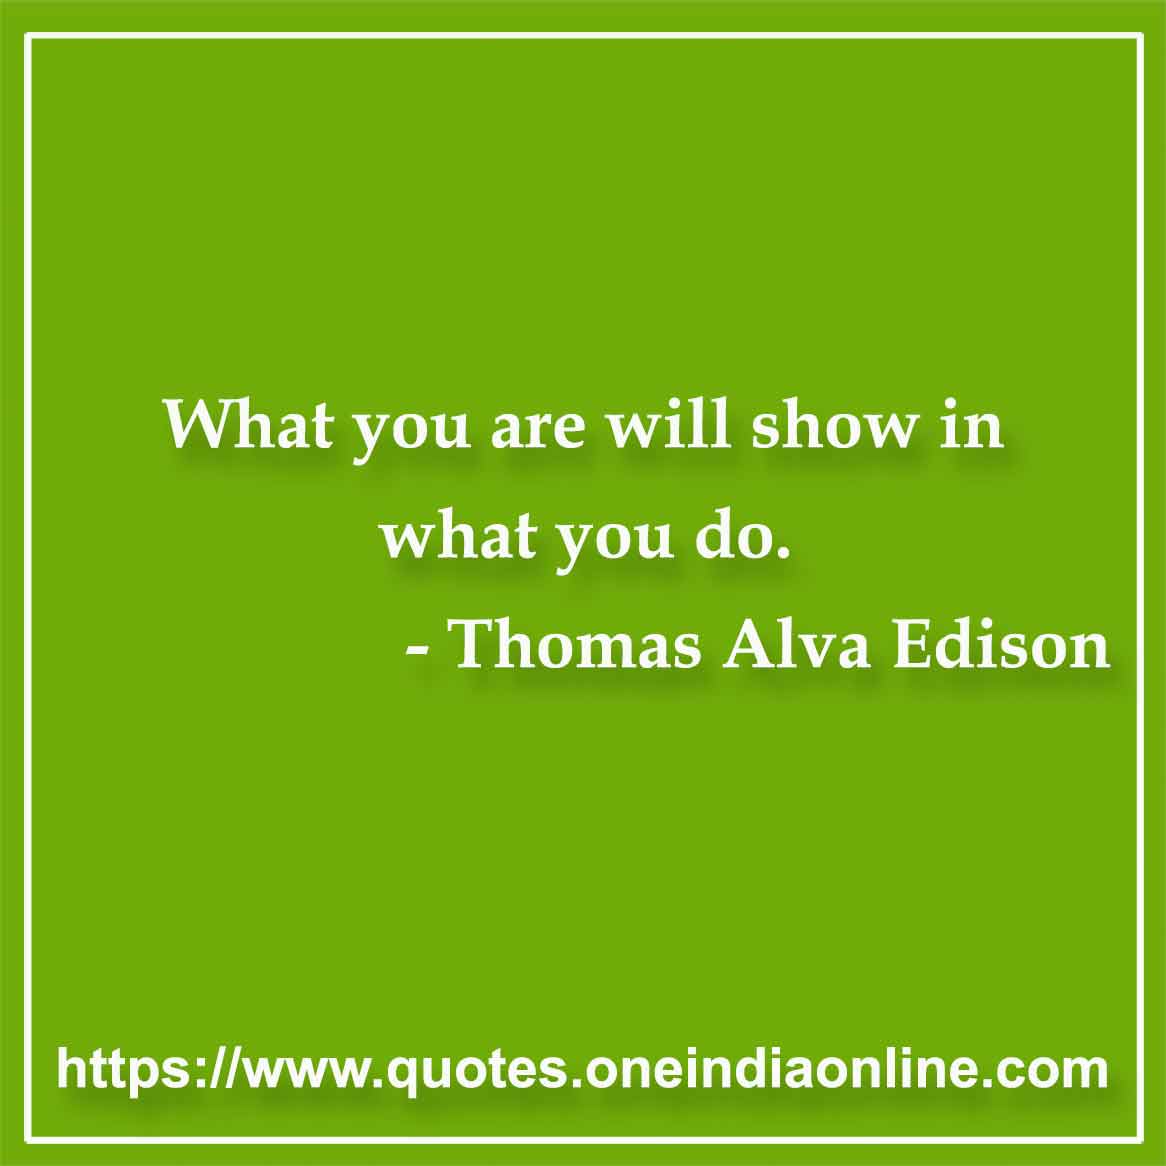 What you are will show in what you do.

Thomas Alva Edison 